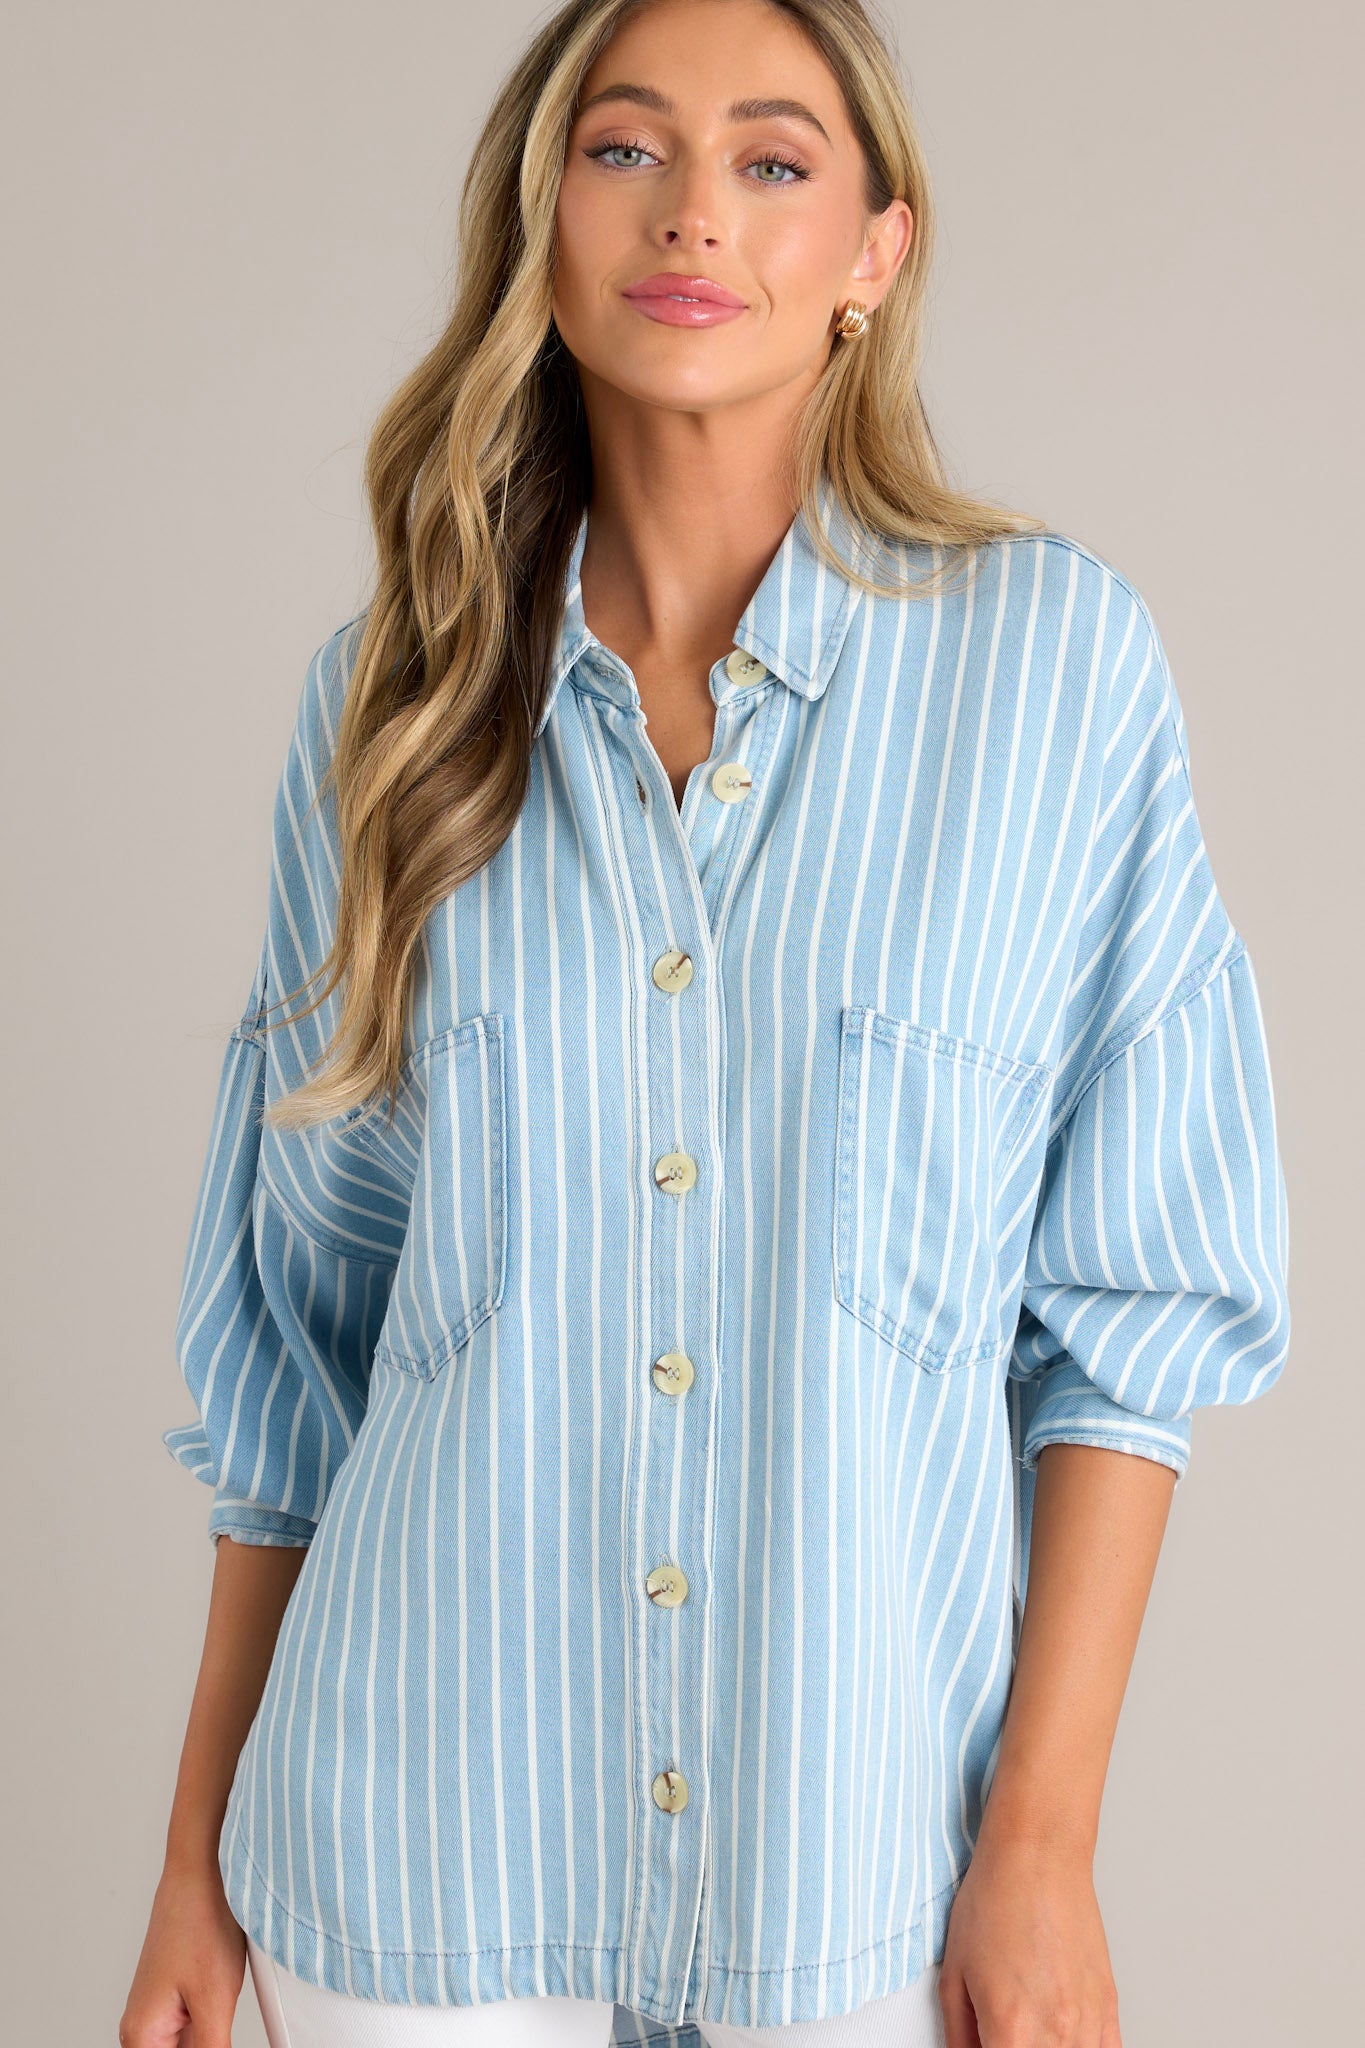 Front view of a top featuring a collared neckline, functional buttons down the front, two functional bust pockets, long sleeves with buttoned cuffs, a scoop bottom hem, and a super soft material.